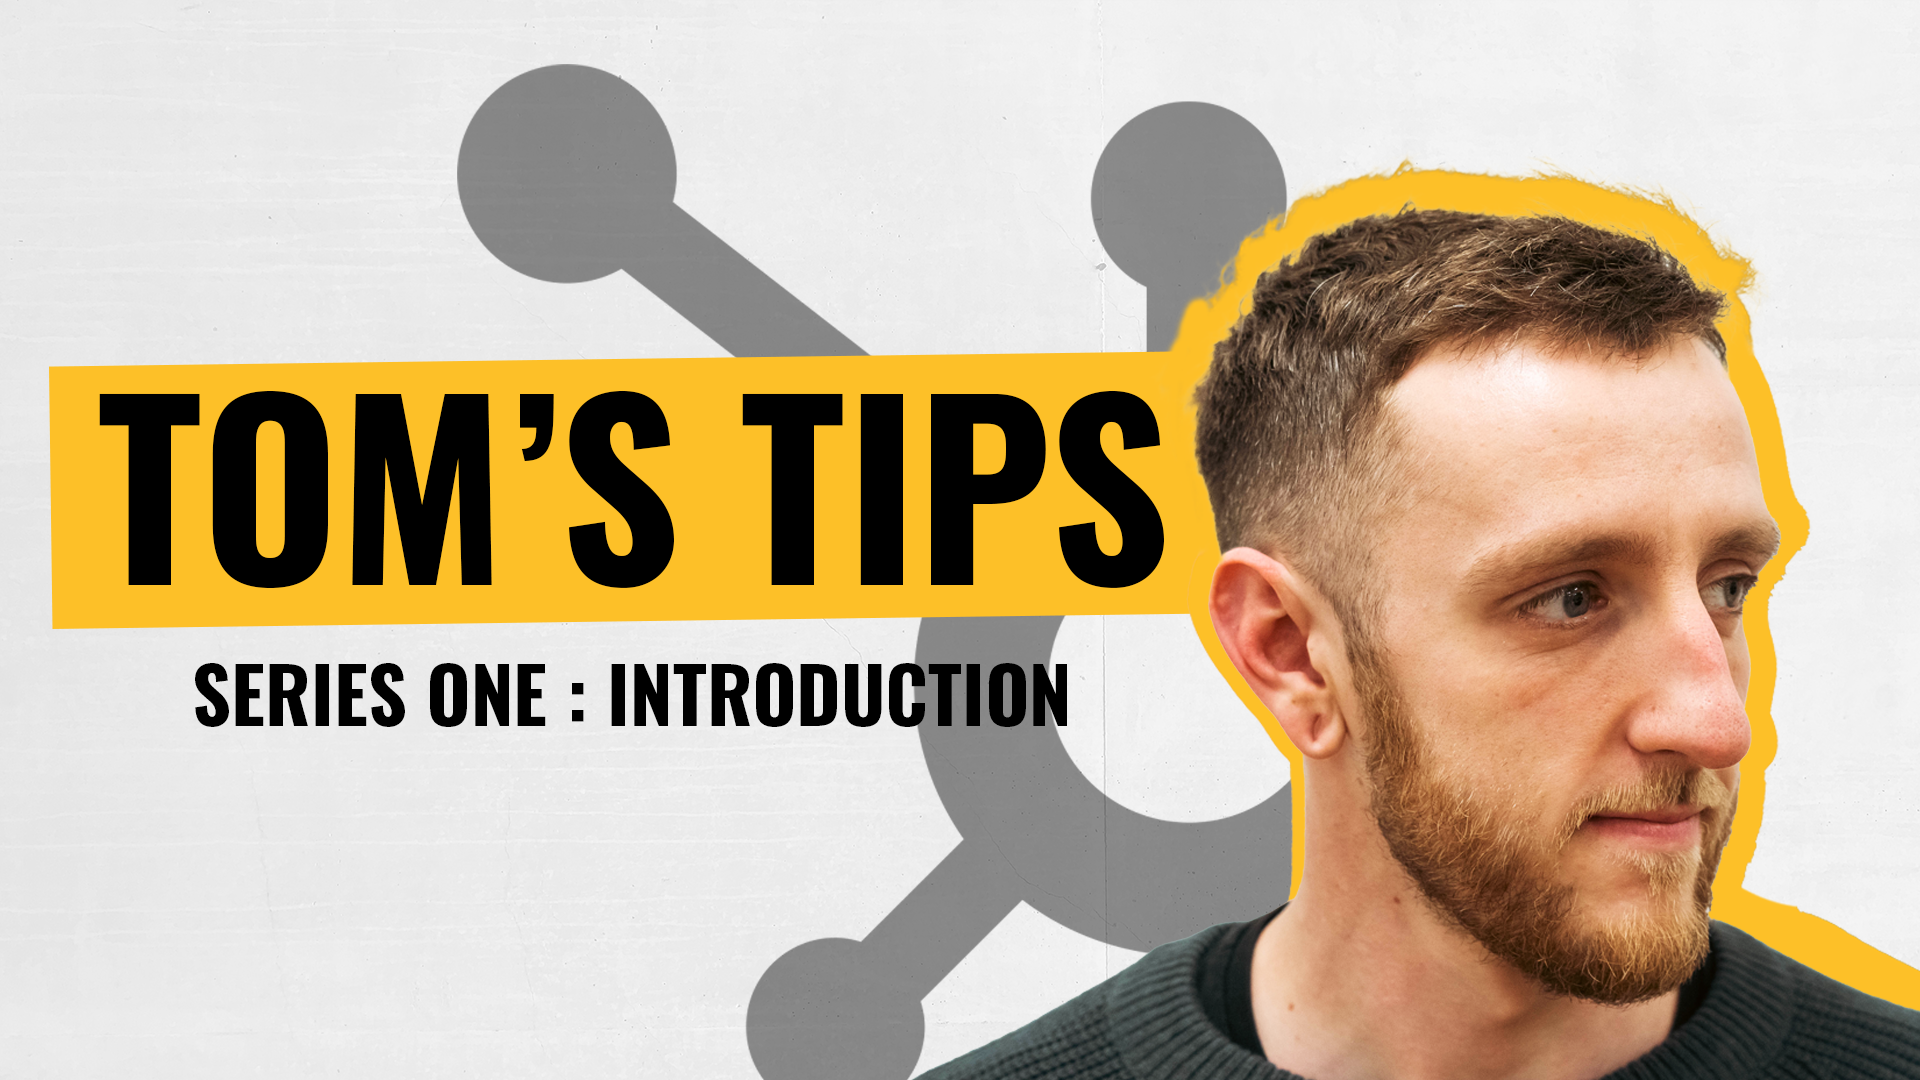 [Video] Tom's Tips - Series One: Introduction